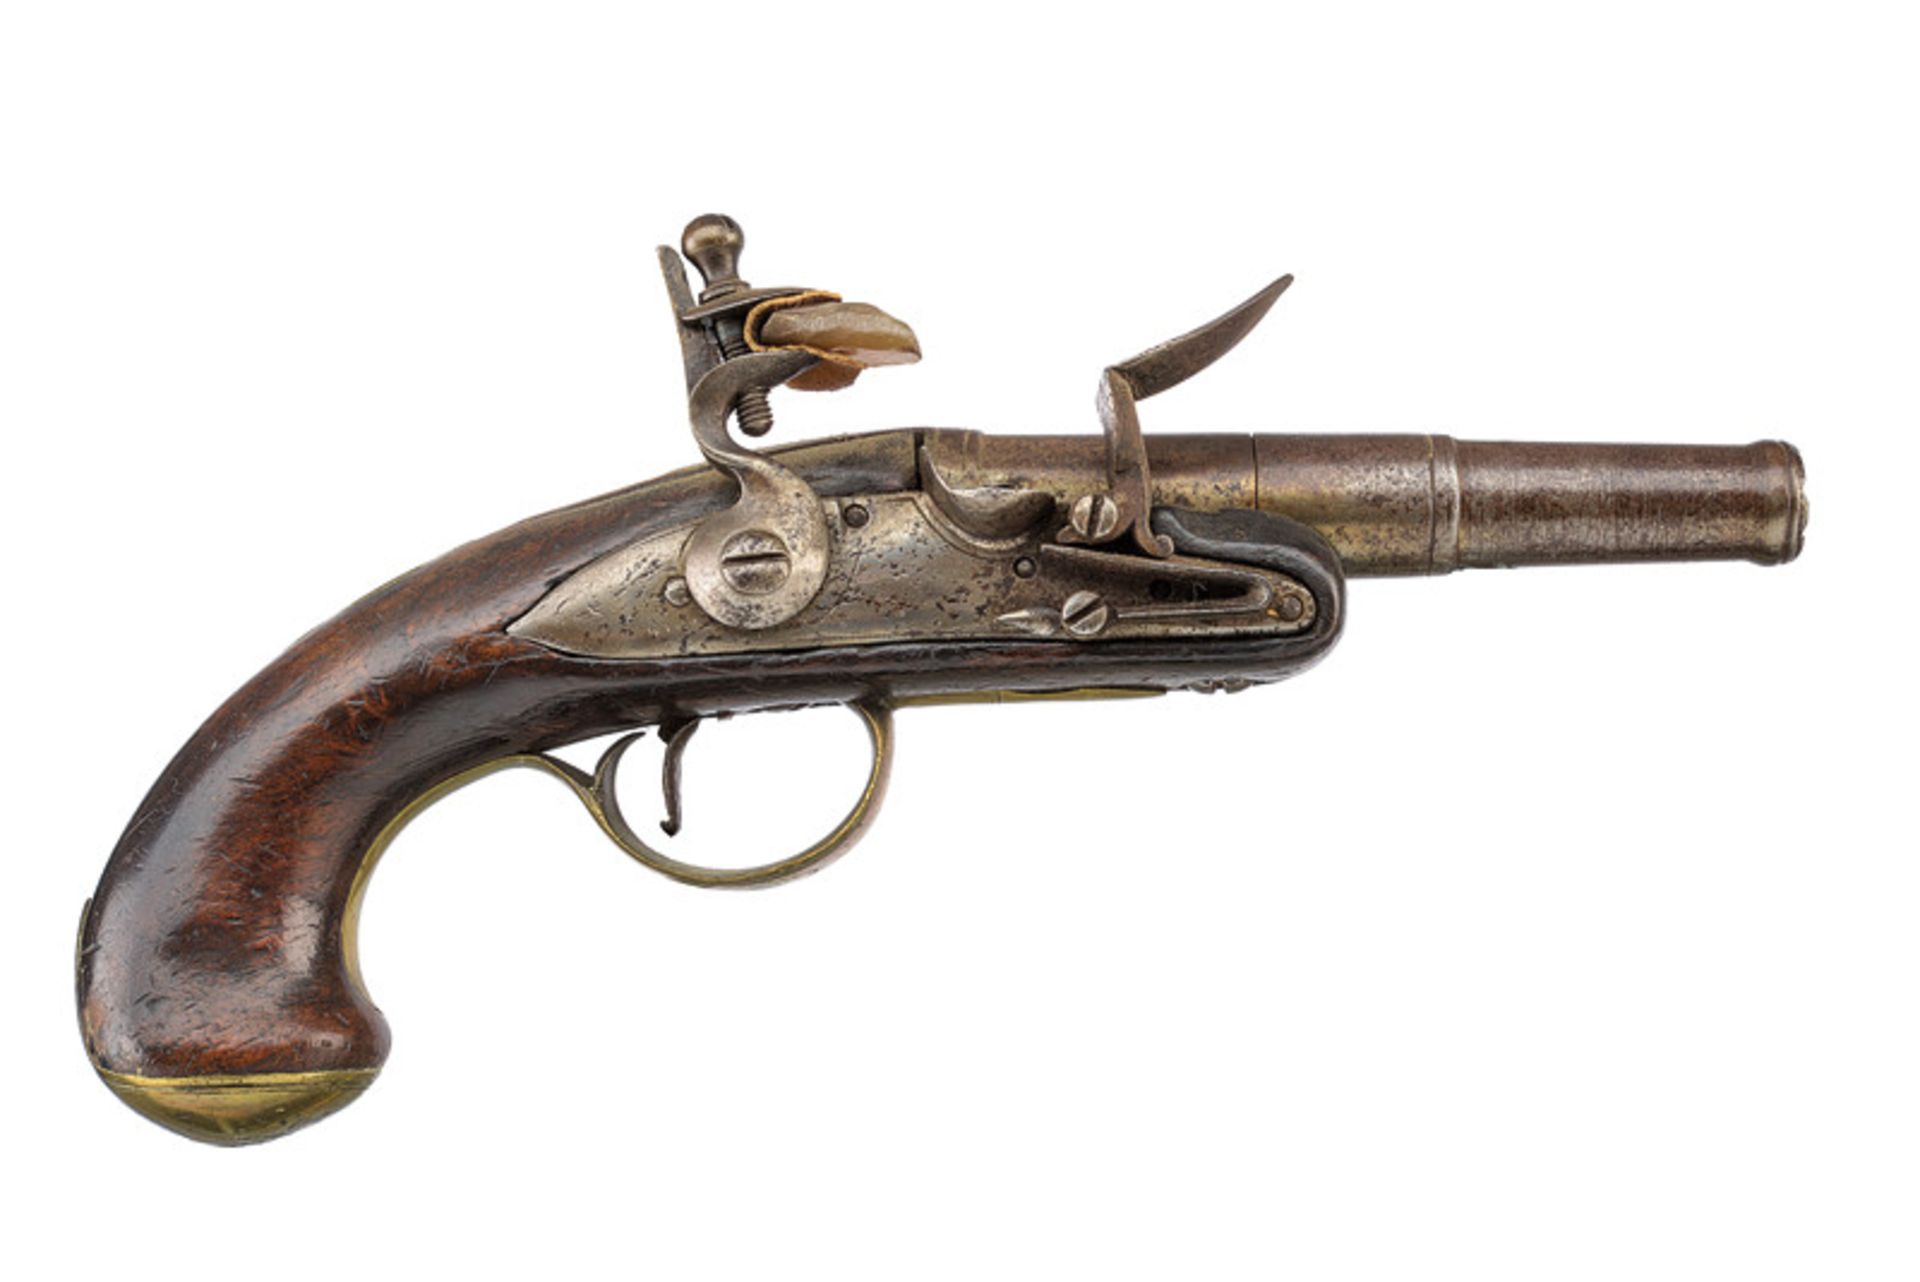 A flintlock pistol dating: late 18th Century provenance: Italy Round, smooth, turn-off, 11 mm cal.